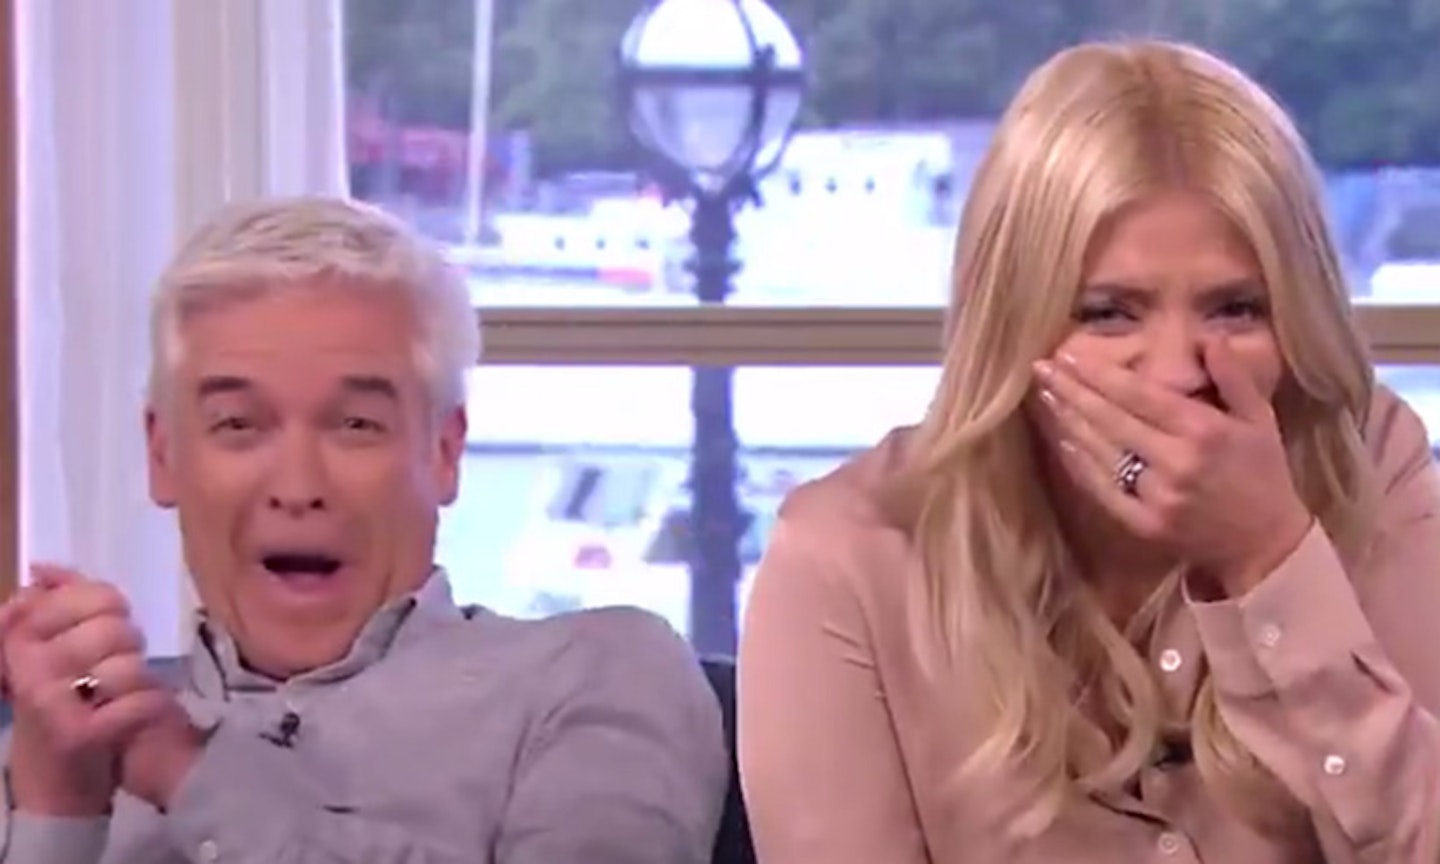 Phillip and Holly on This Morning